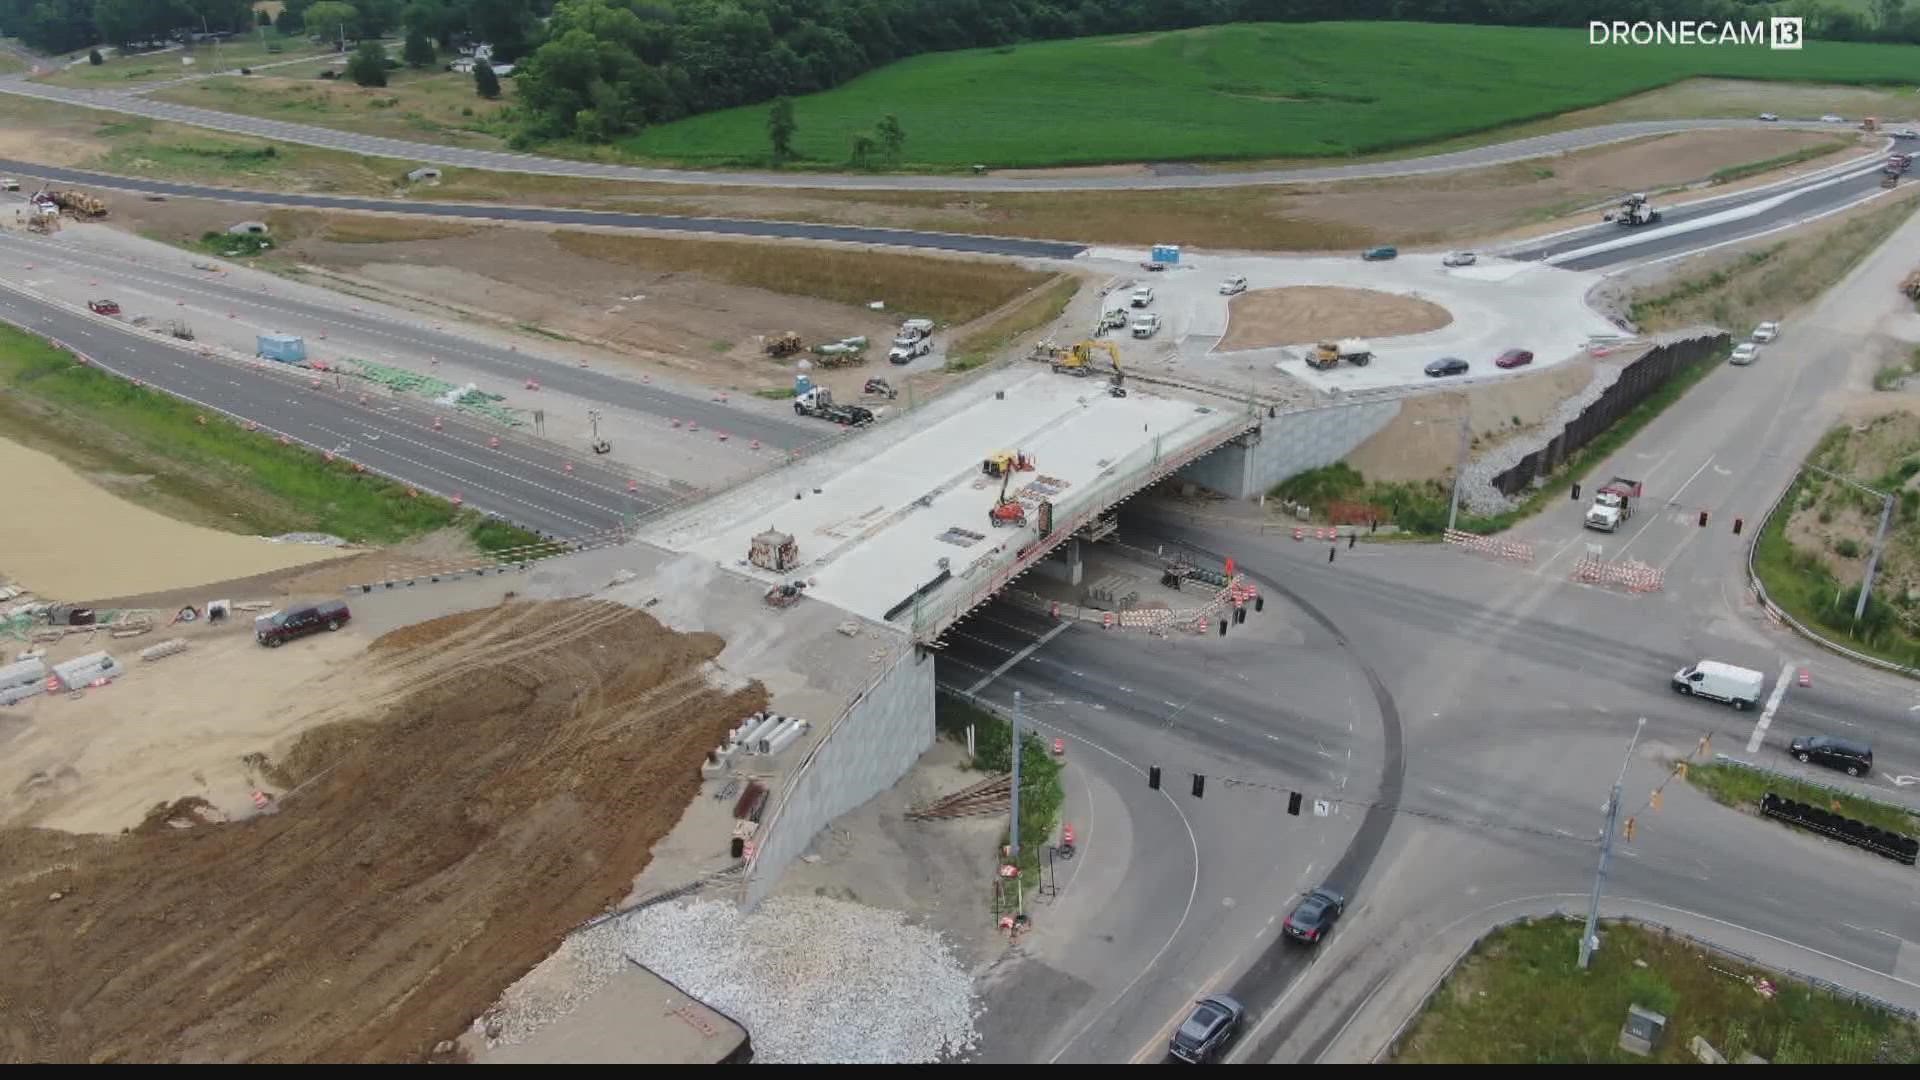 Crews are on track for a major project to convert SR 37 into I-69 on Indy's south side.